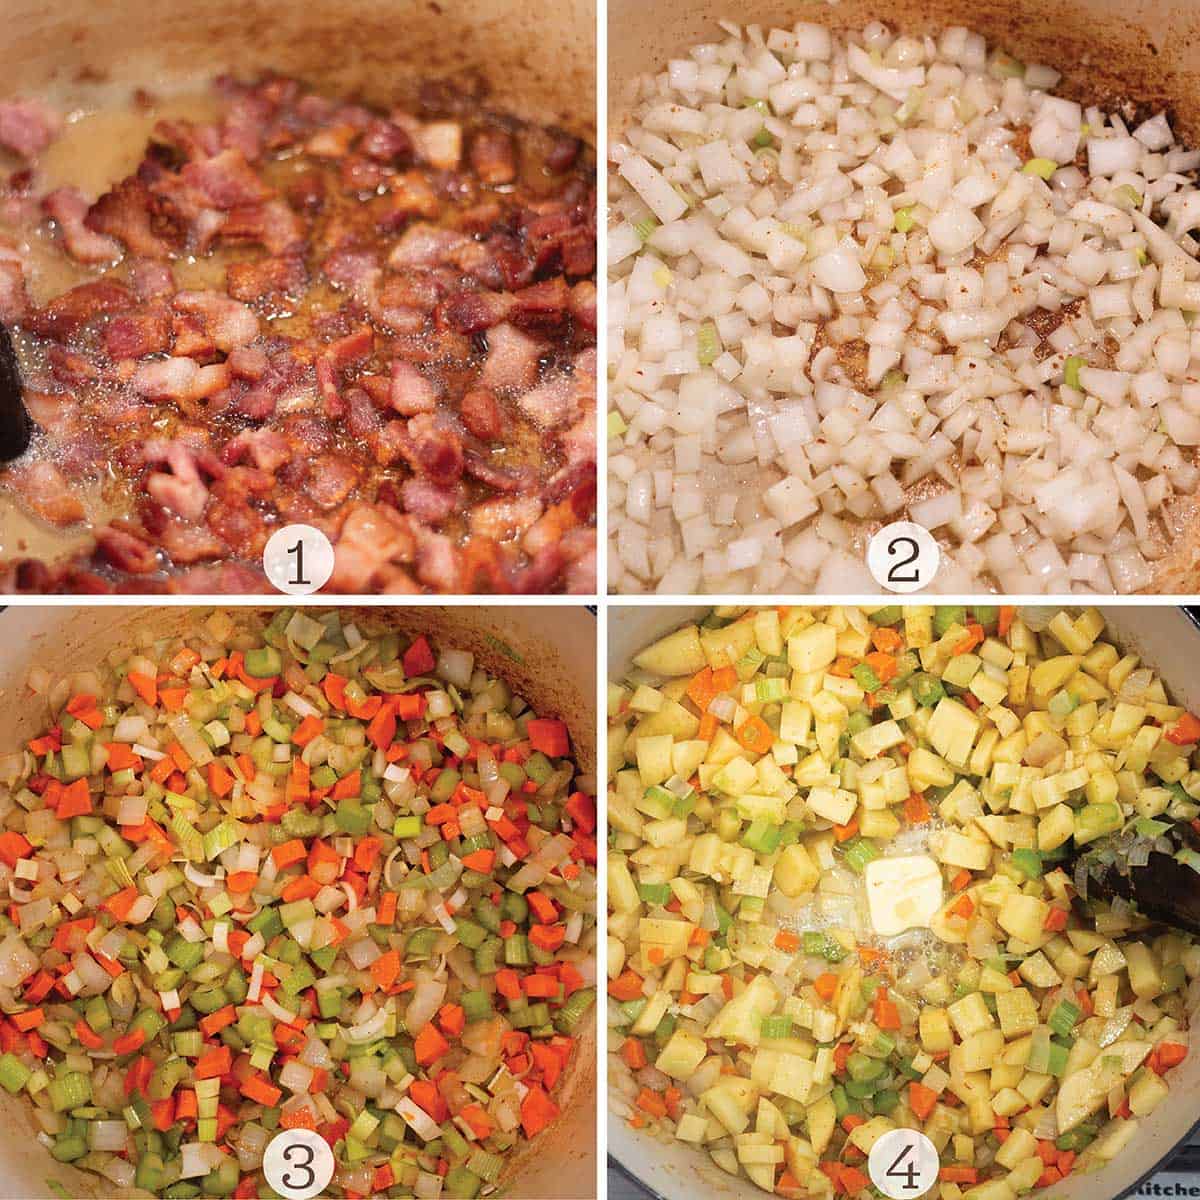 FOur images of soup being made. Bacon simmering, veggies and potatoes sautéing. 